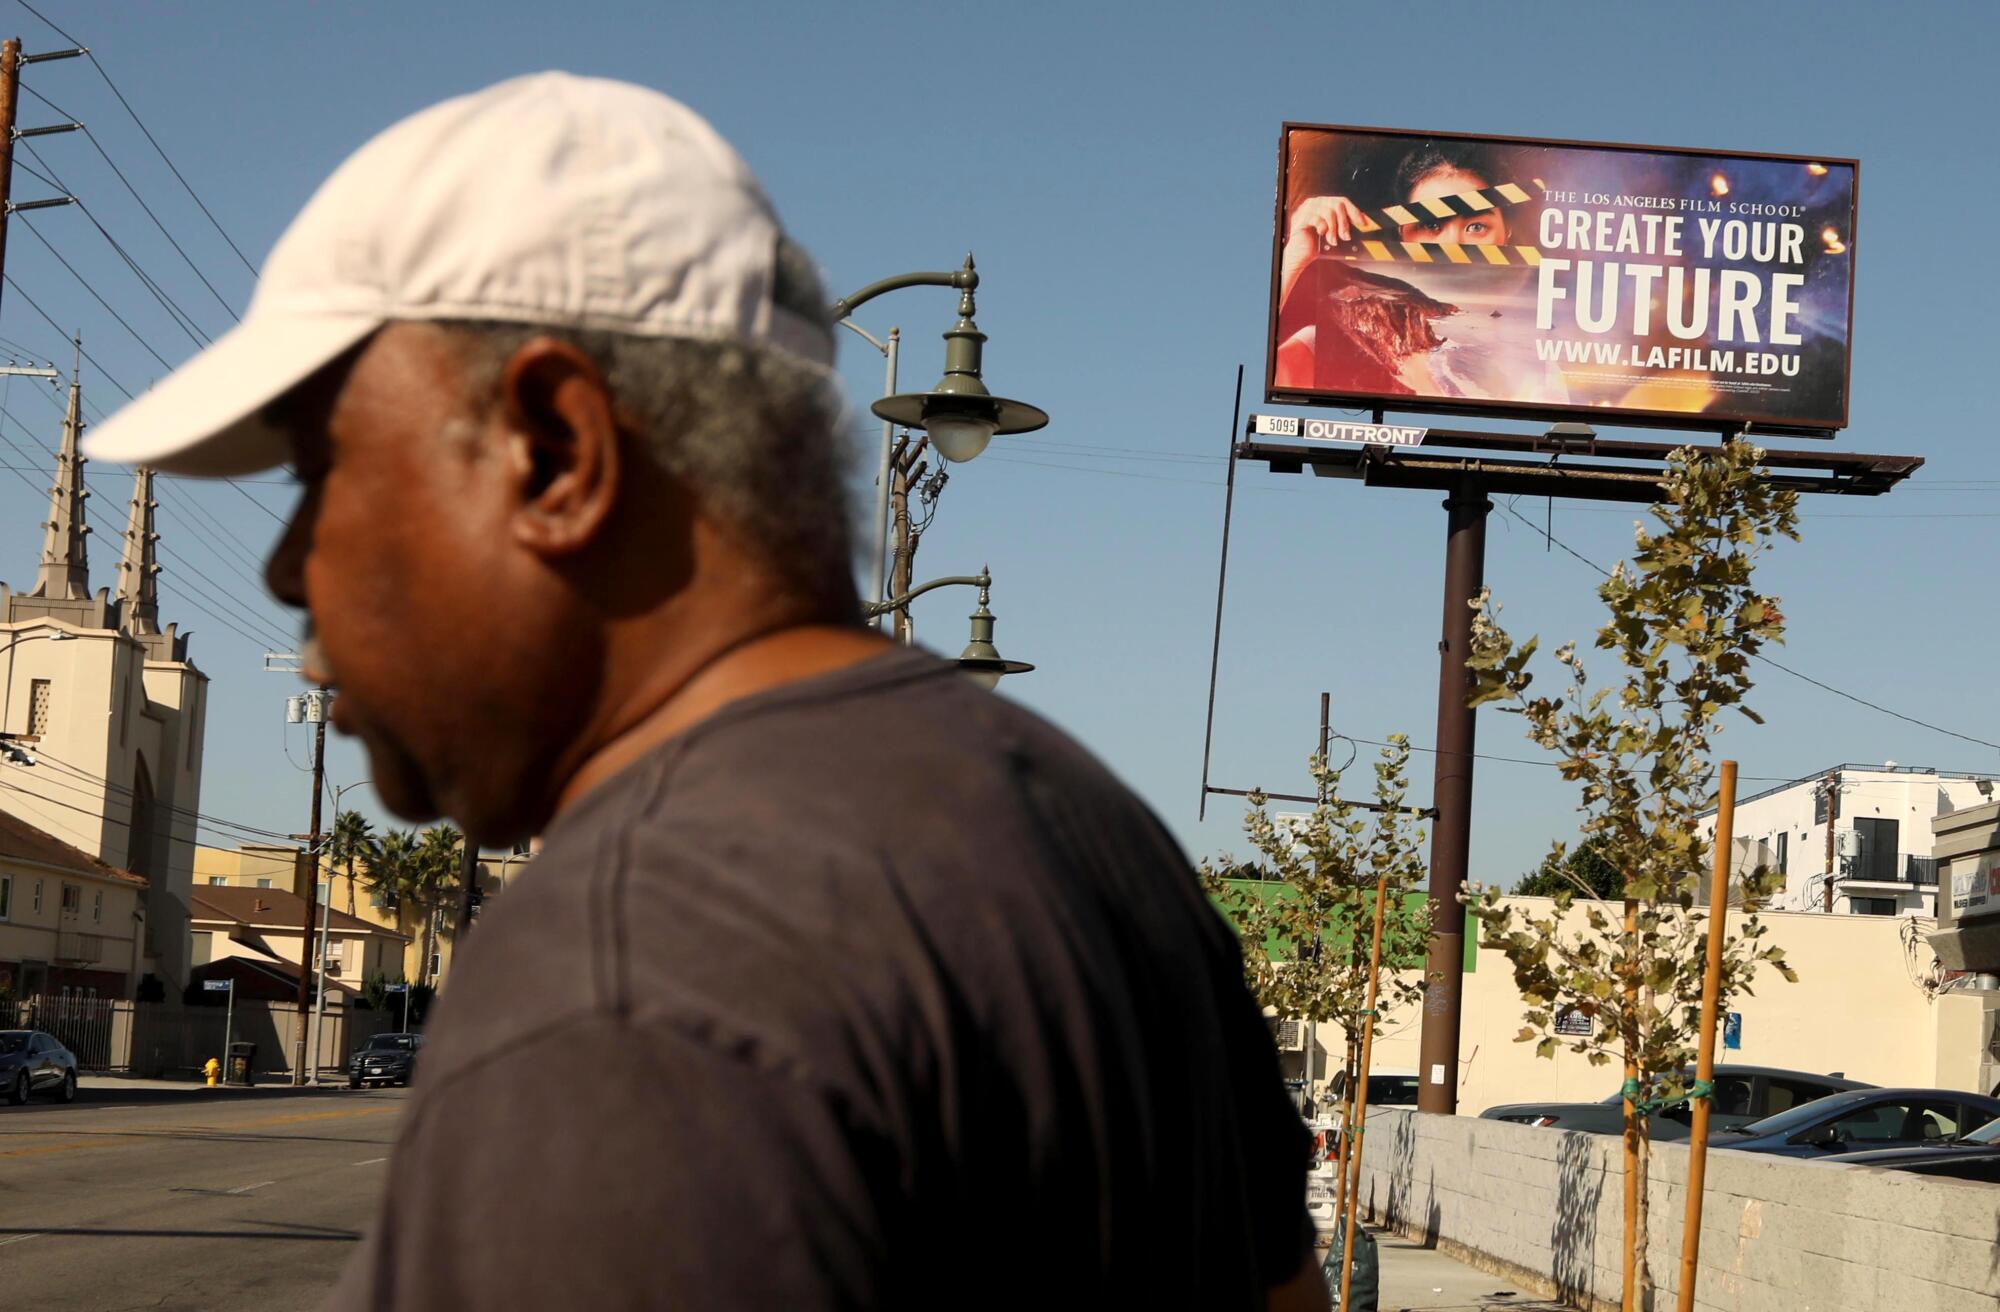 A man wearing a hat walks past a billboard with the message: "Create Your Future."